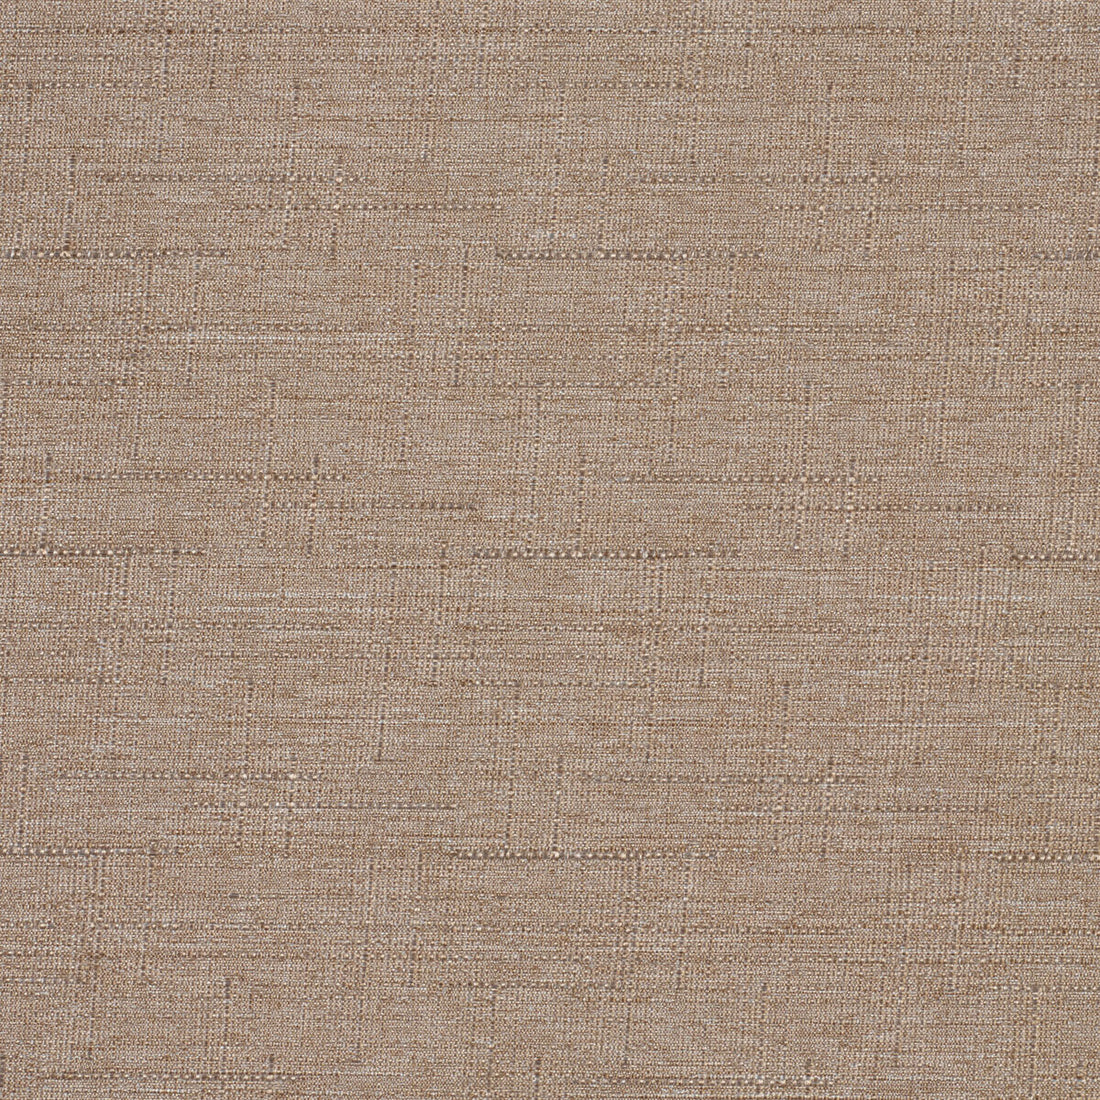 Kravet Contract fabric in 4321-106 color - pattern 4321.106.0 - by Kravet Contract